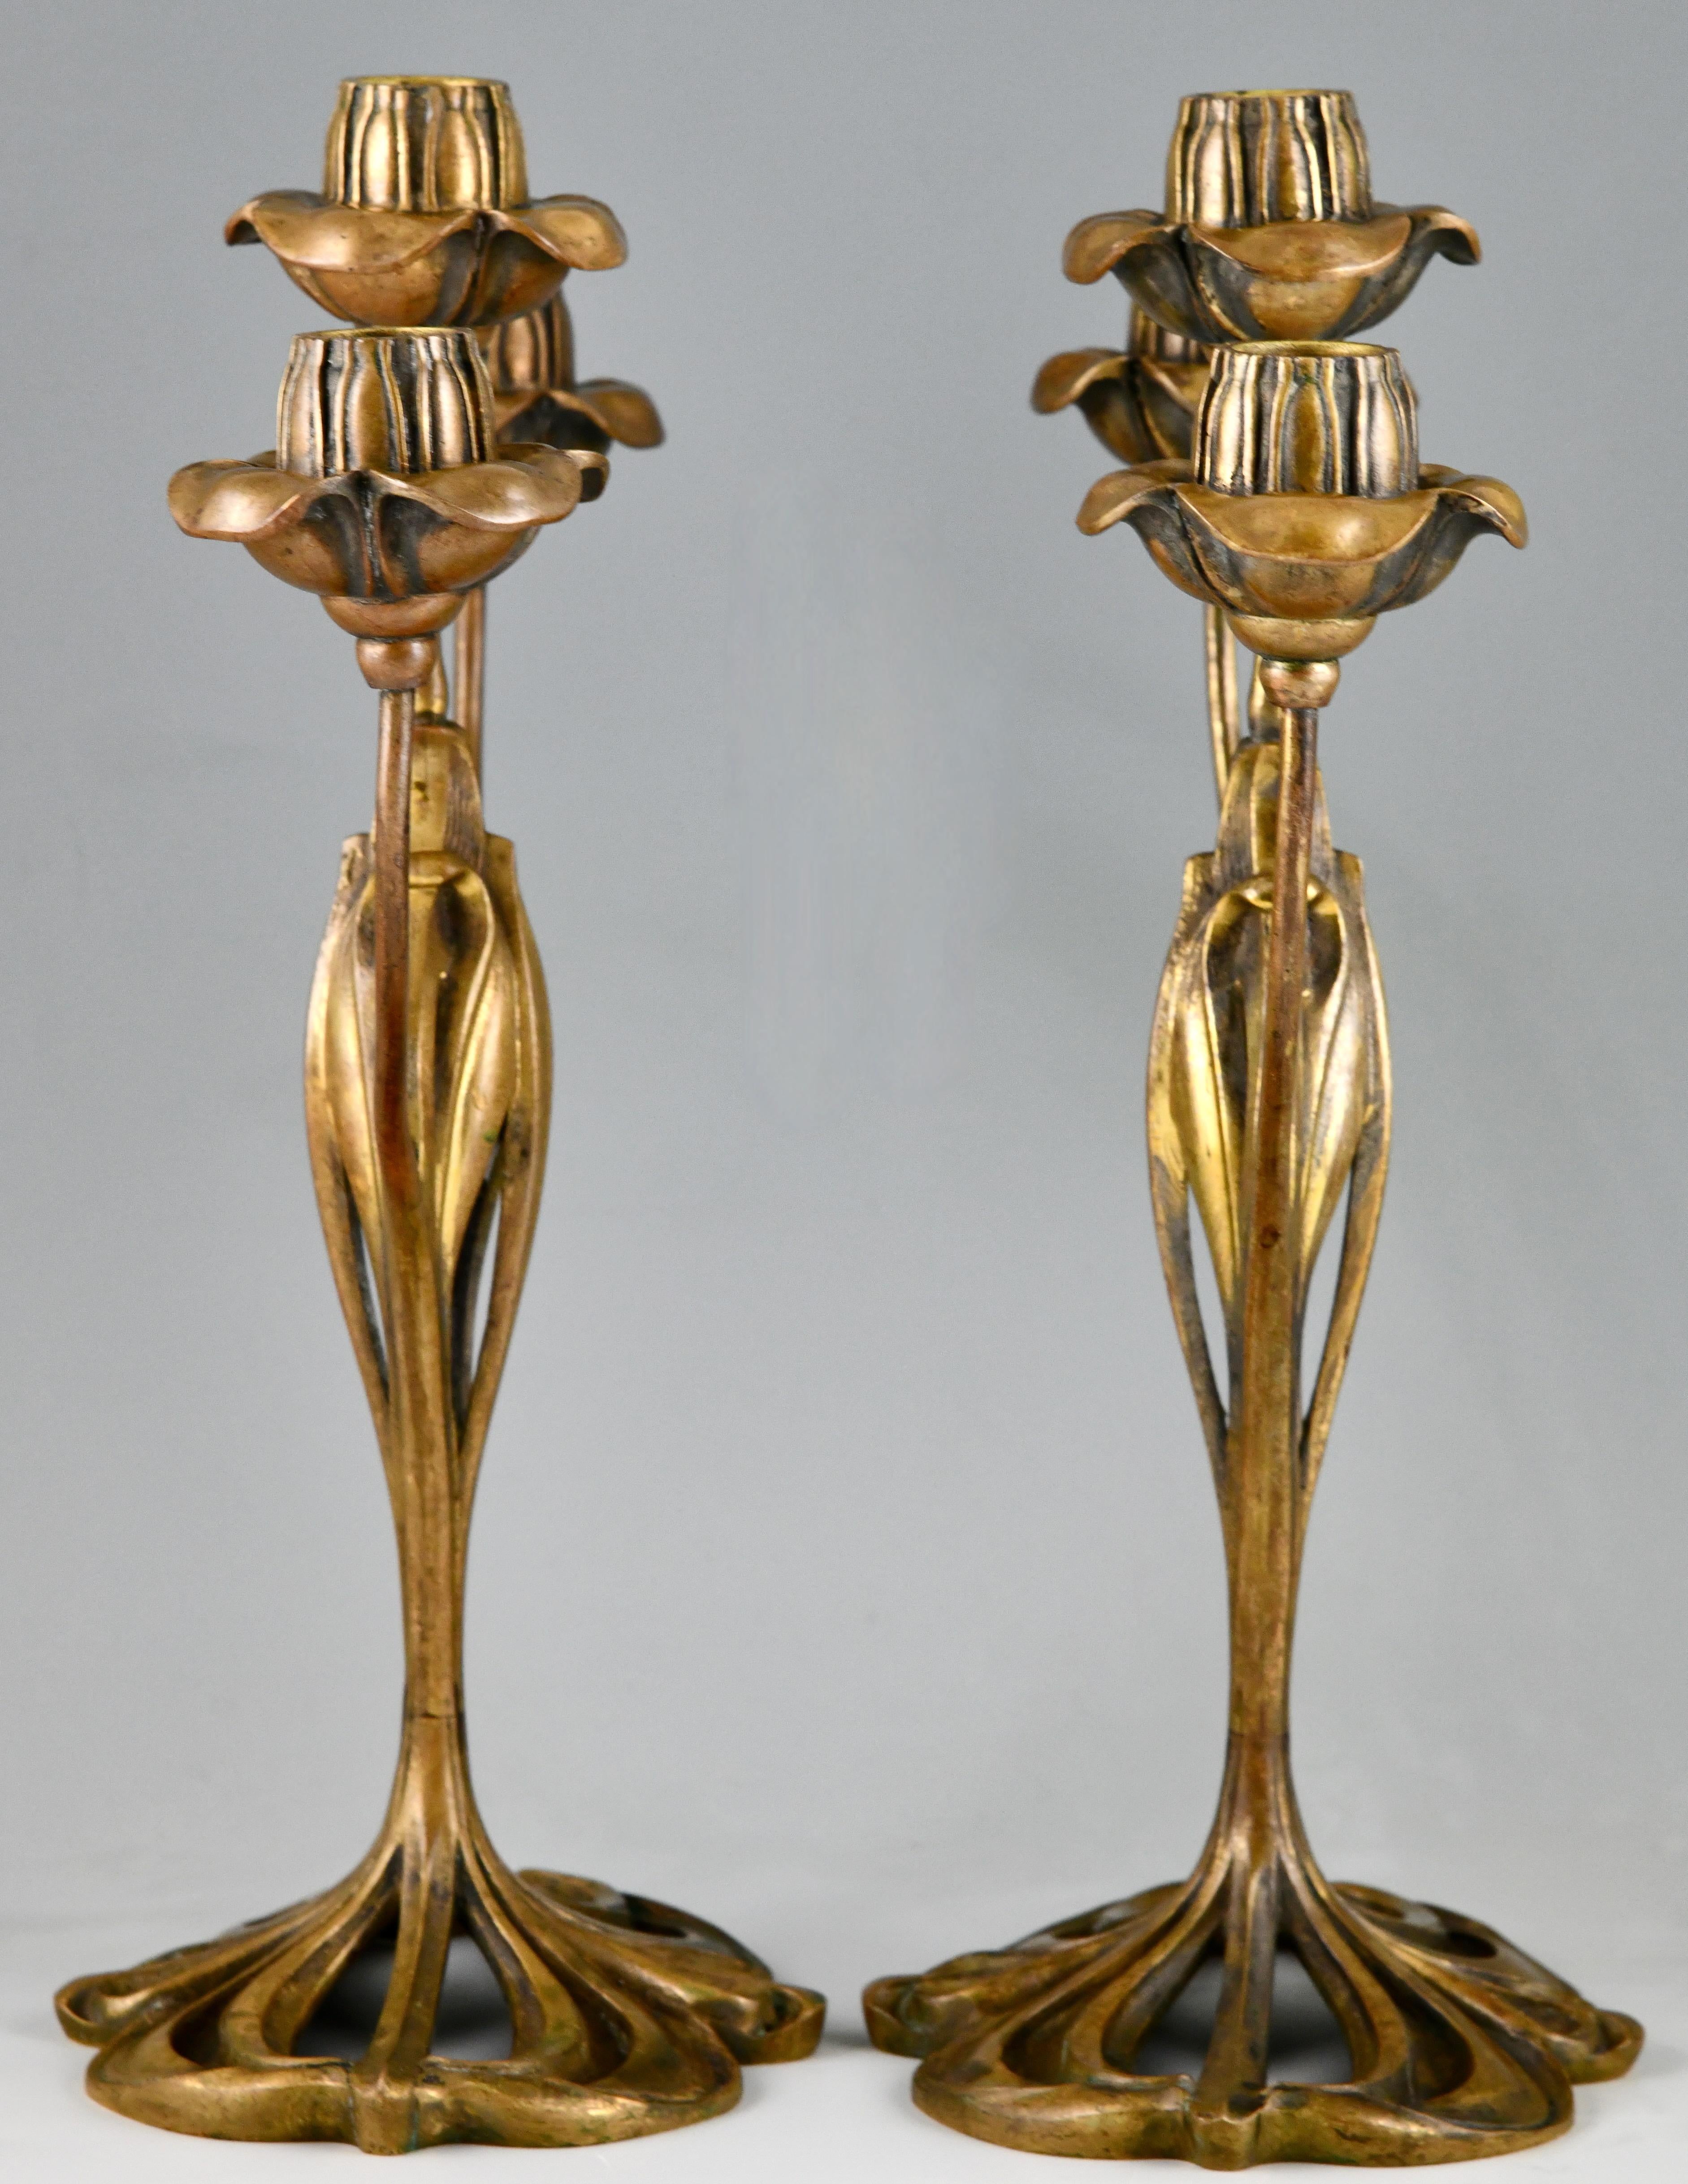 French Pair of bronze Art Nouveau candelabra with floral design by Georges de Feure For Sale